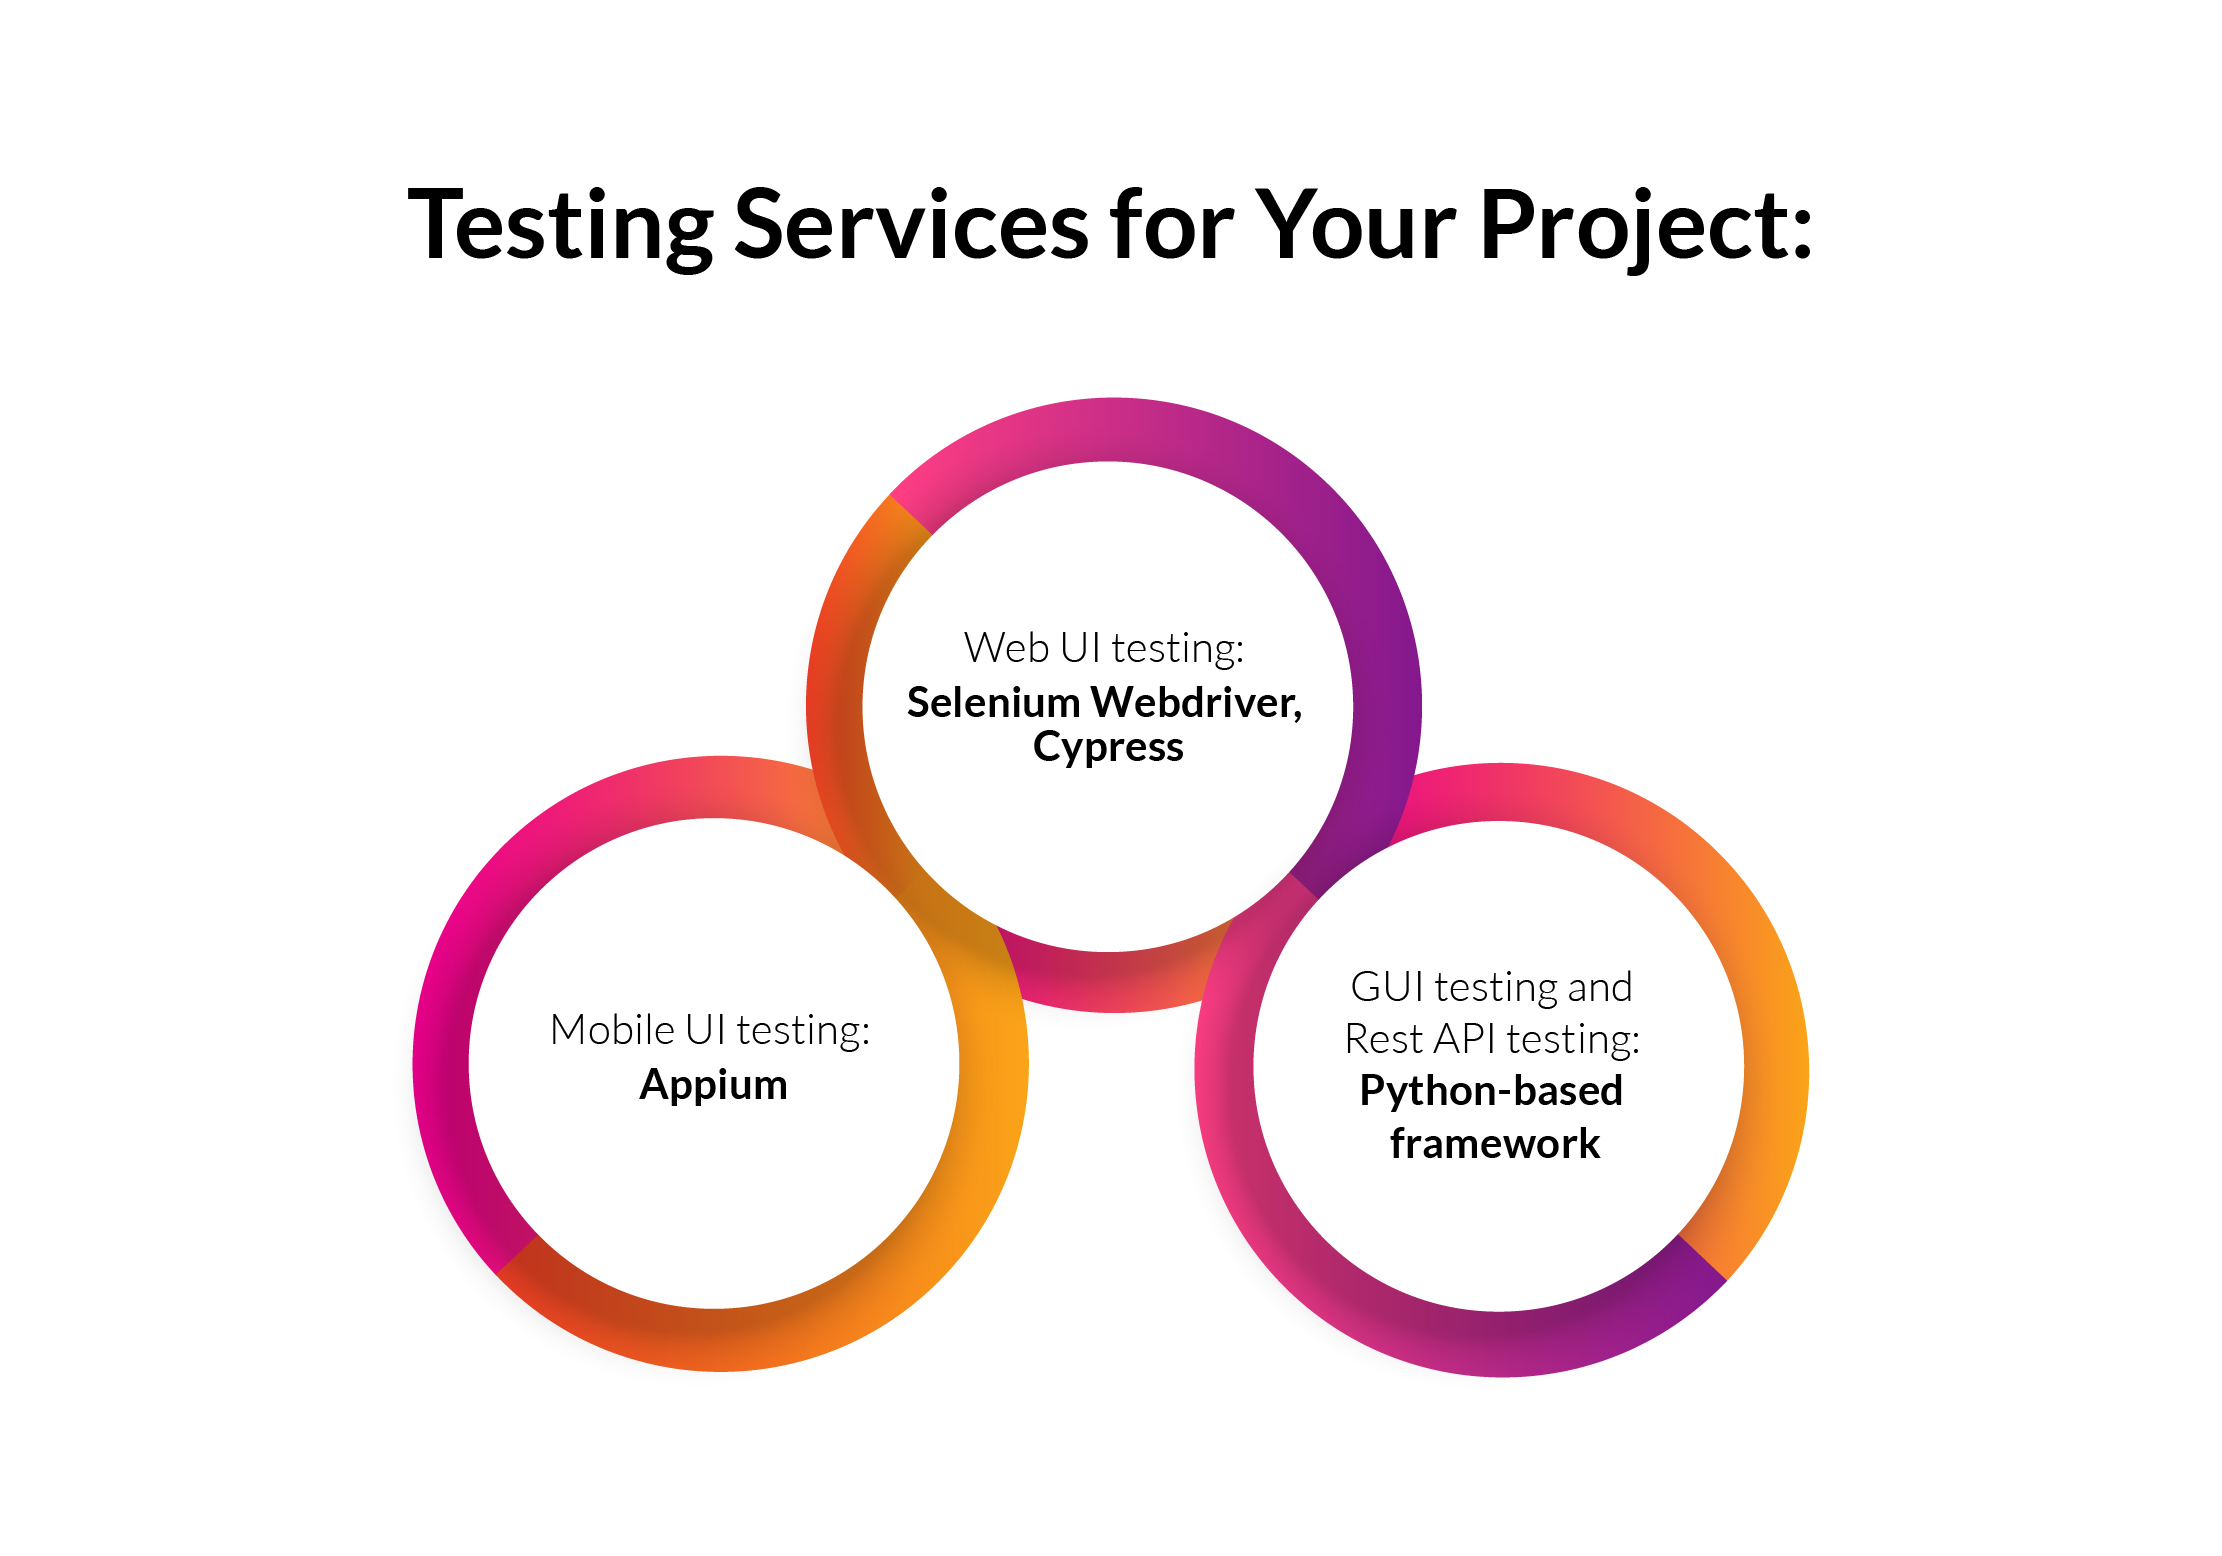 Testing Services for Your Project.jpg